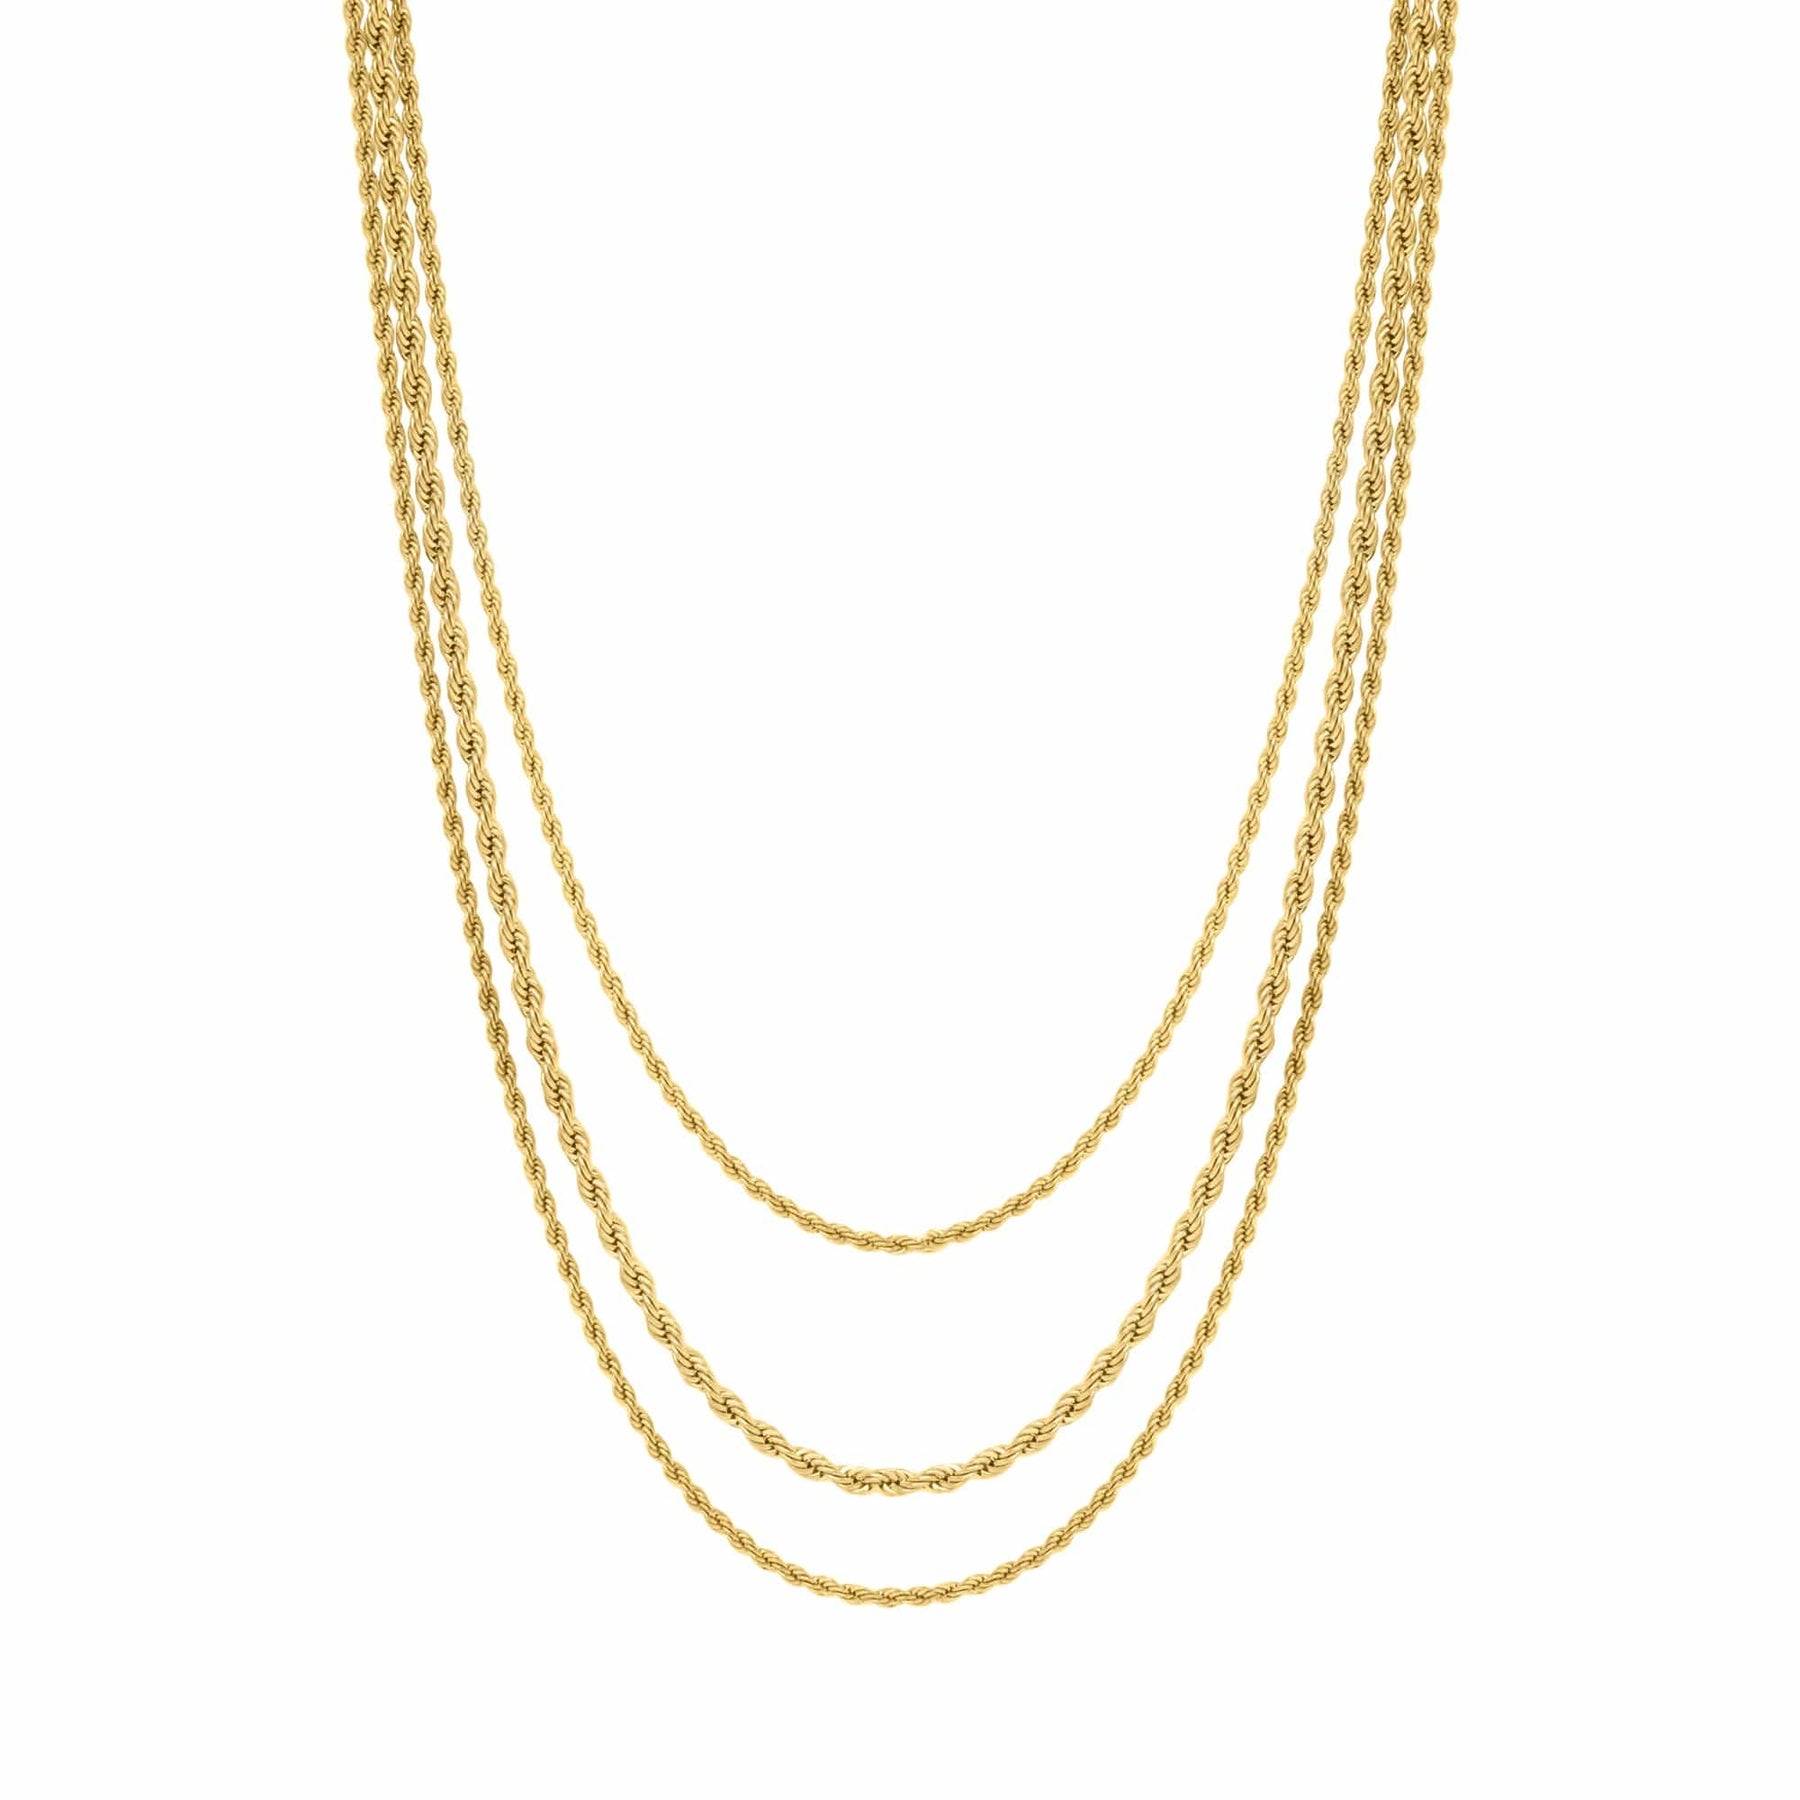 BohoMoon Stainless Steel Align Layered Necklace Gold